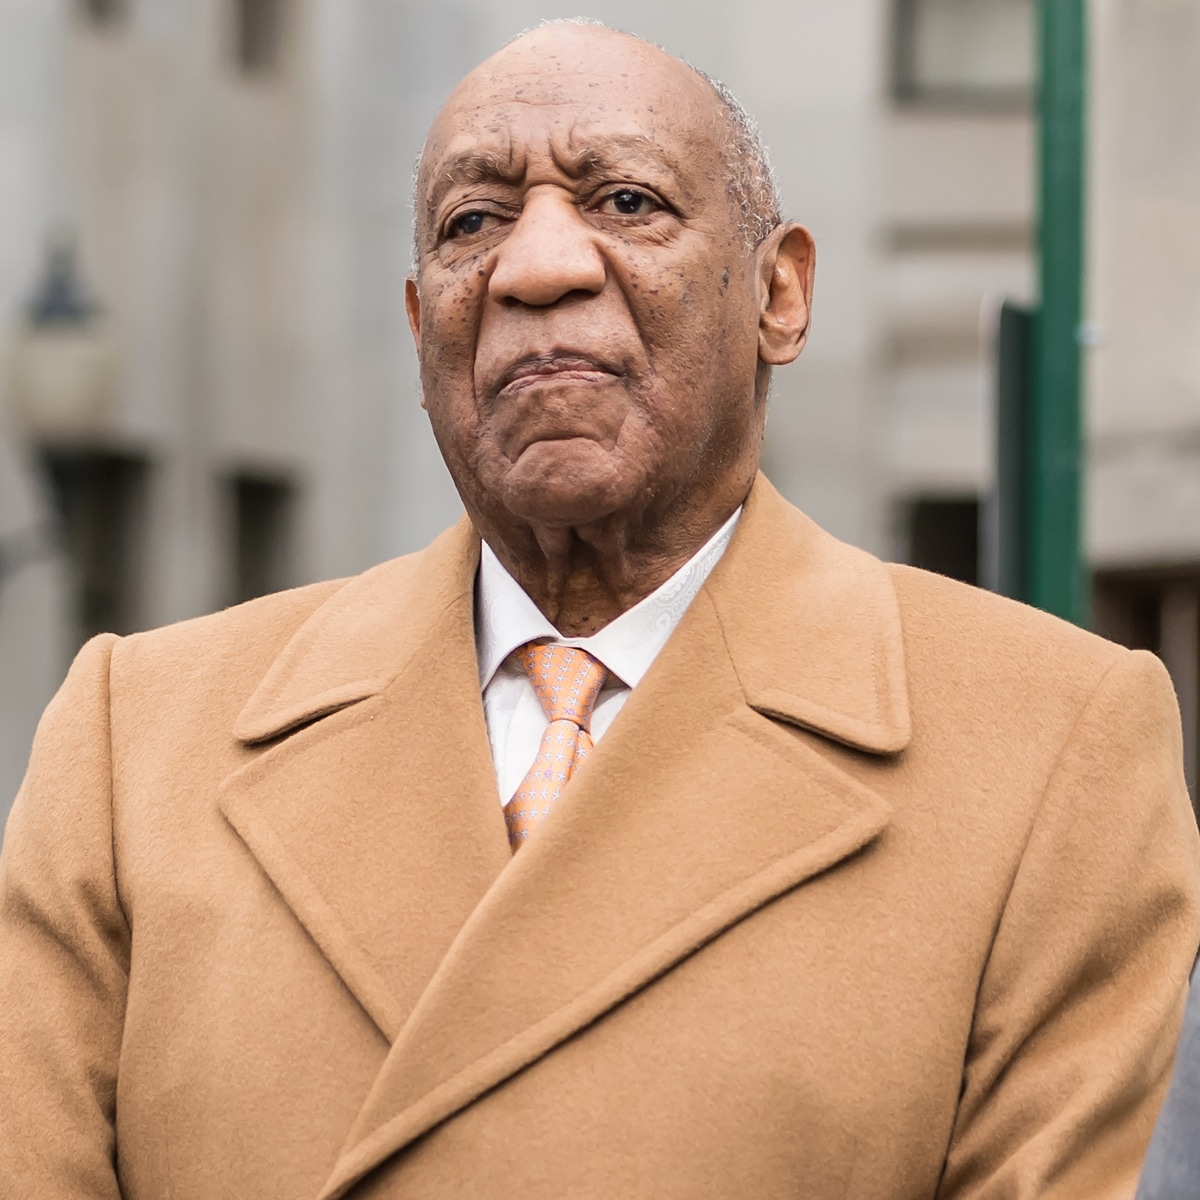 Bill Cosby Released From Prison After Overturned Conviction - E! Online